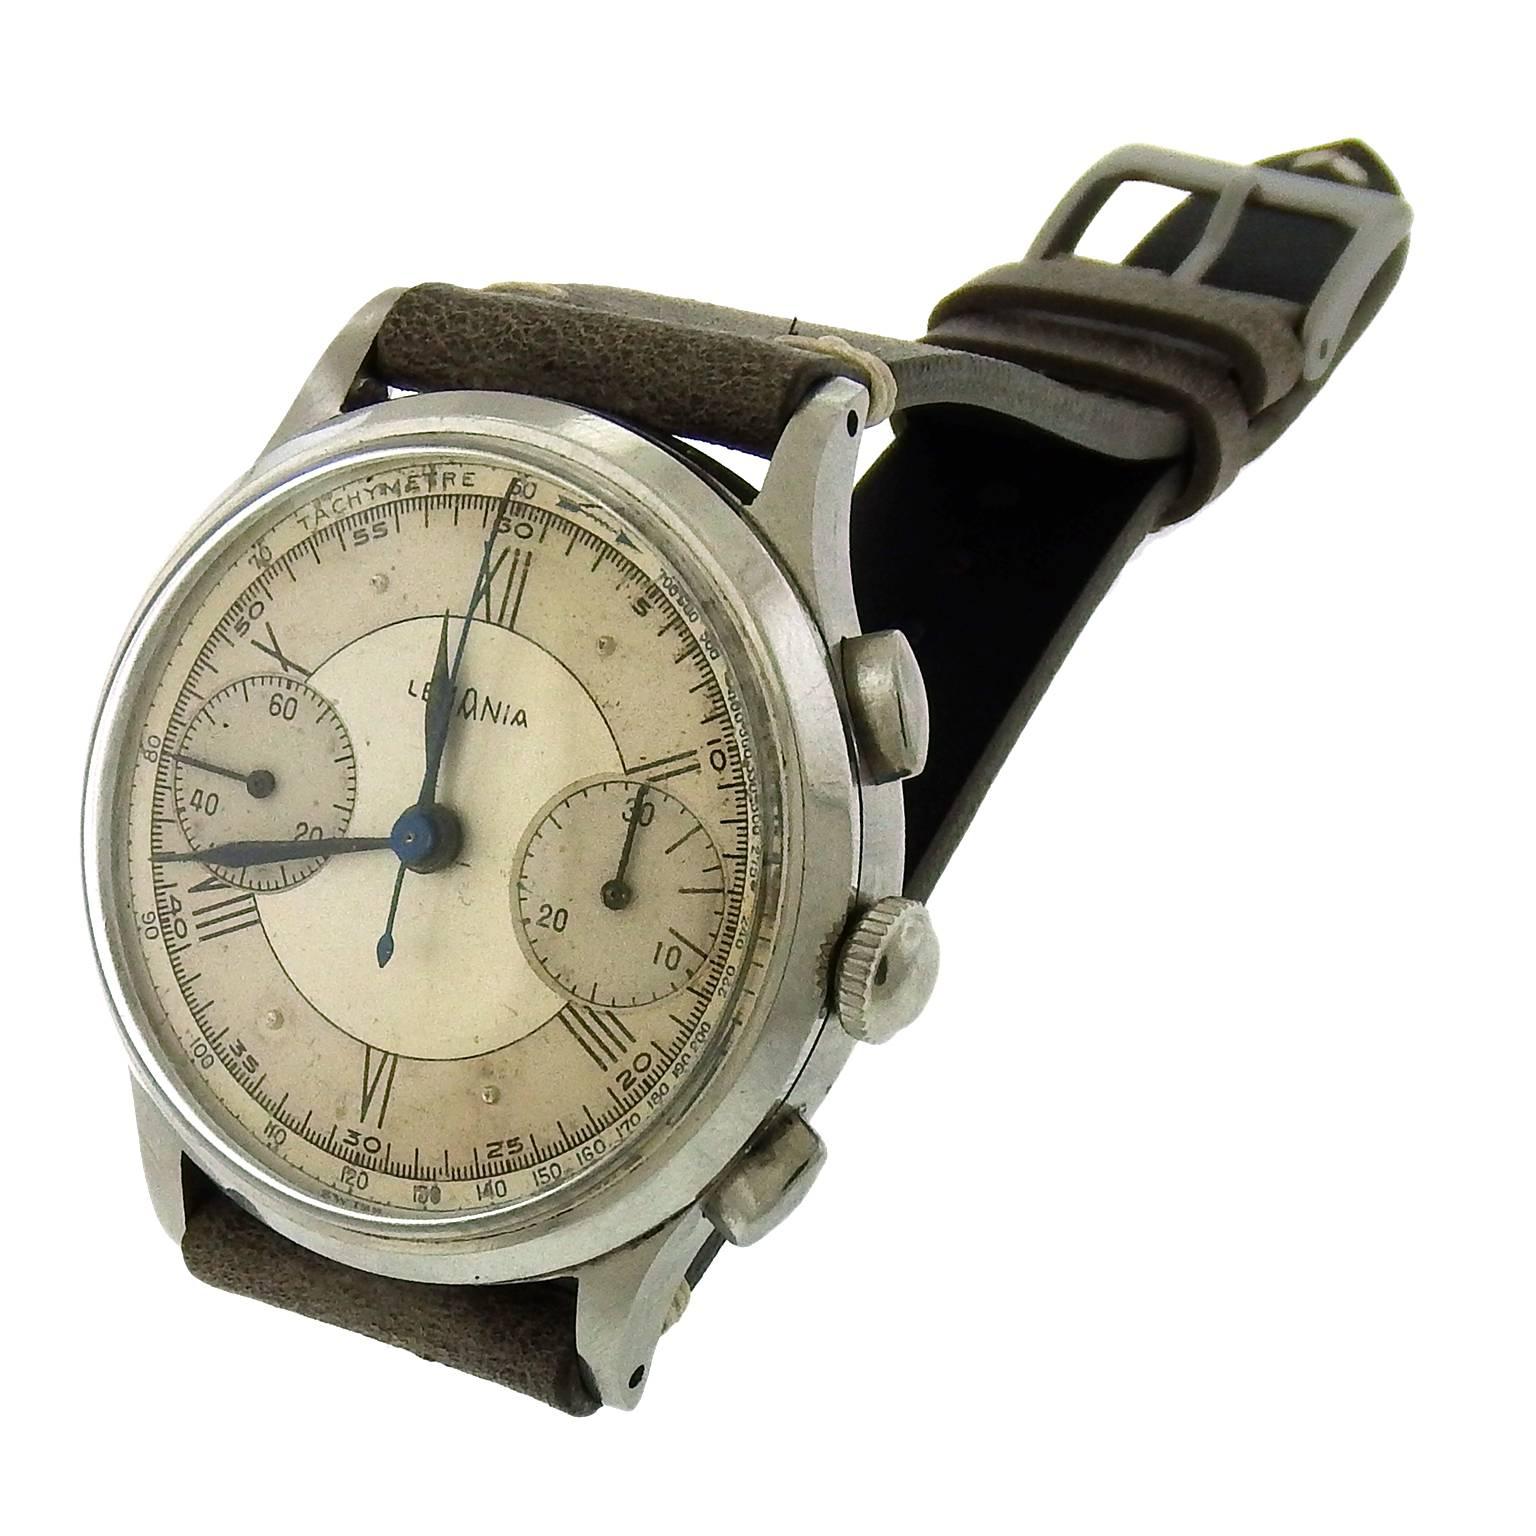 Lemania Stainless Steel Valjoux Chronograph Manual Wind Wristwatch 1940s 1